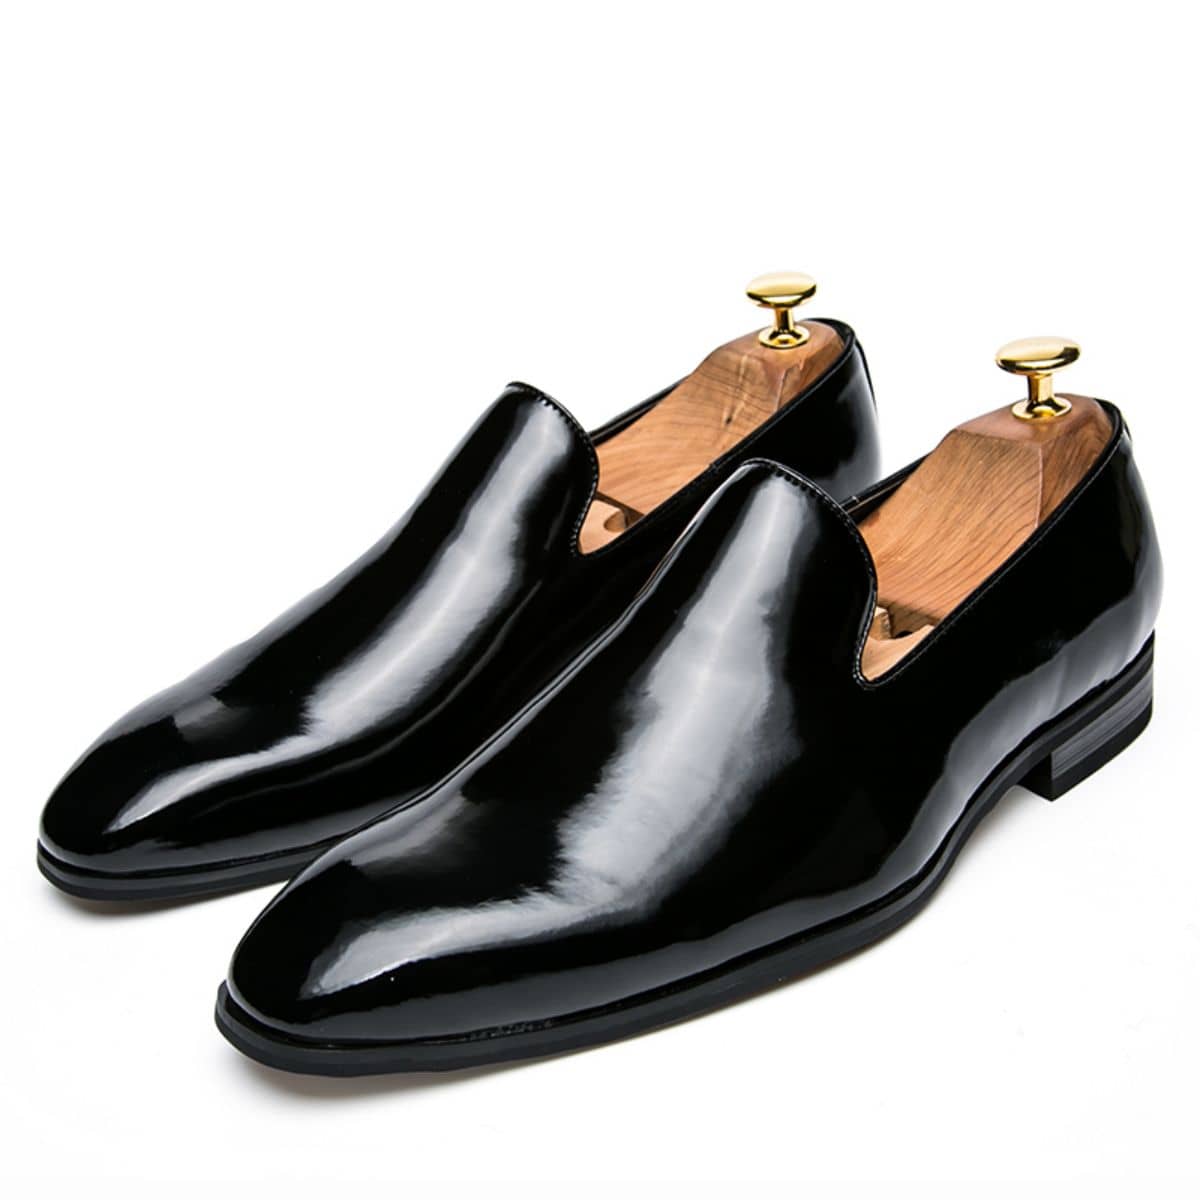 SHEIN Men's Dress Shoes Loafers Fashionable Men's Shoes Black EUR38,EUR39,EUR40,EUR41,EUR42,EUR43,EUR44